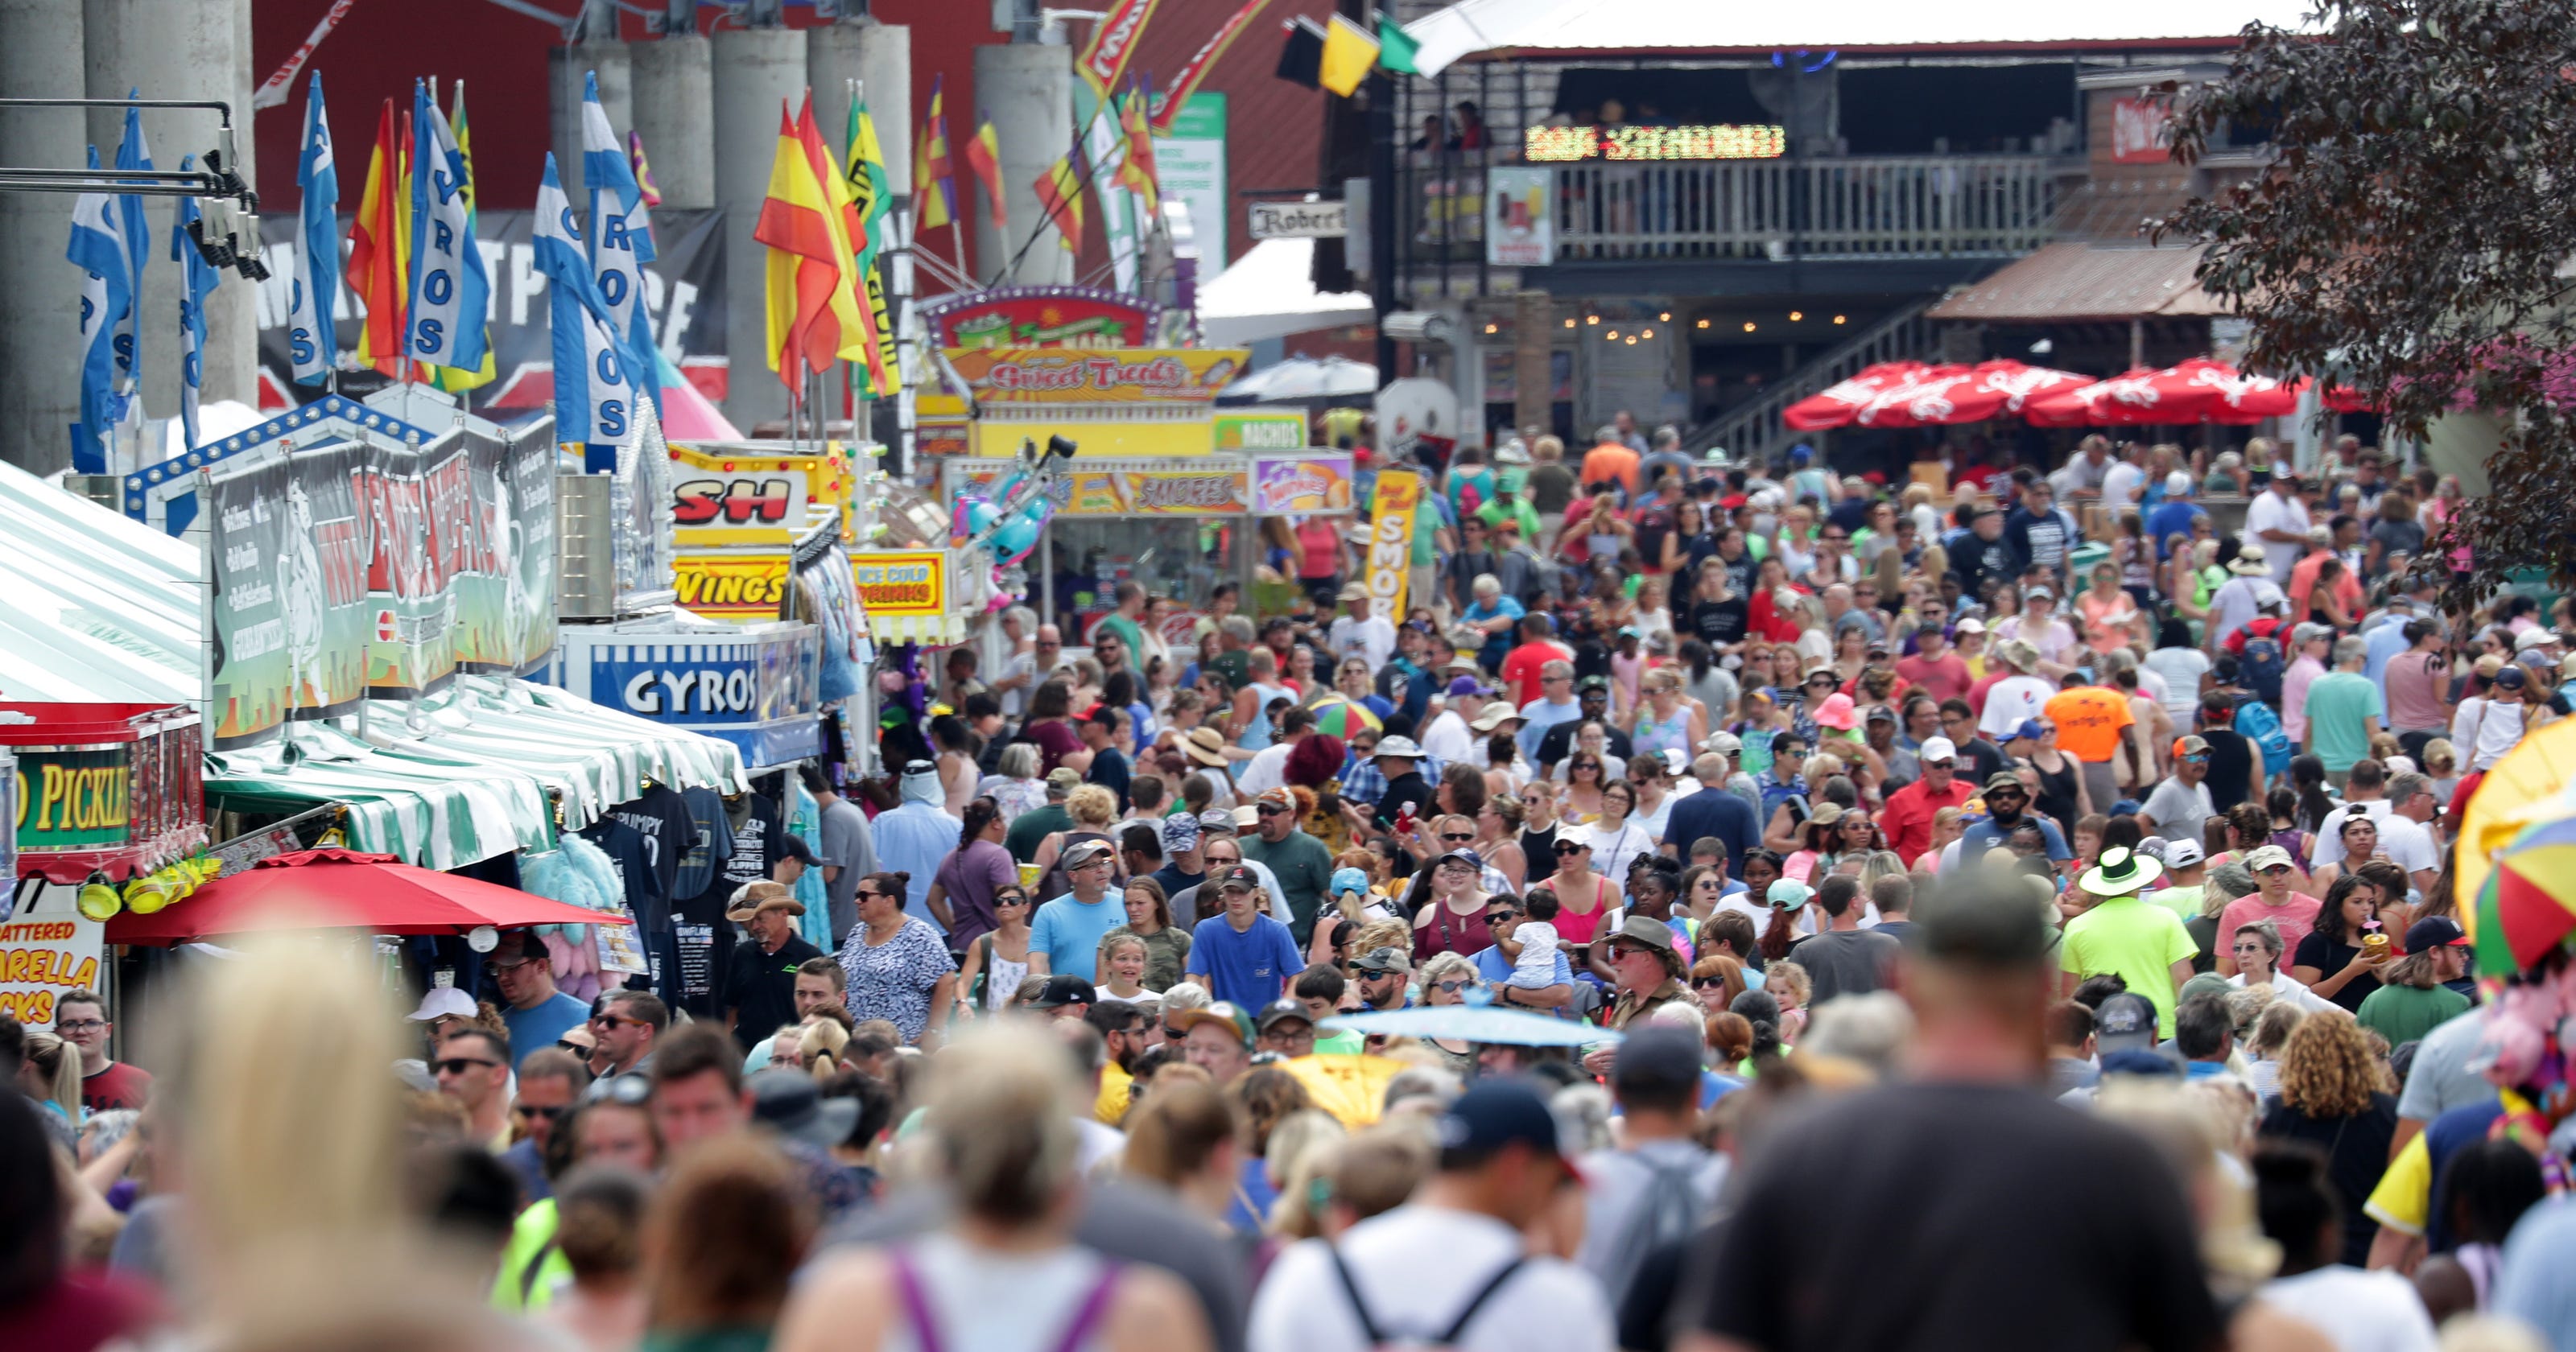 Wisconsin State Fair sets modern attendance record of 1.1 million